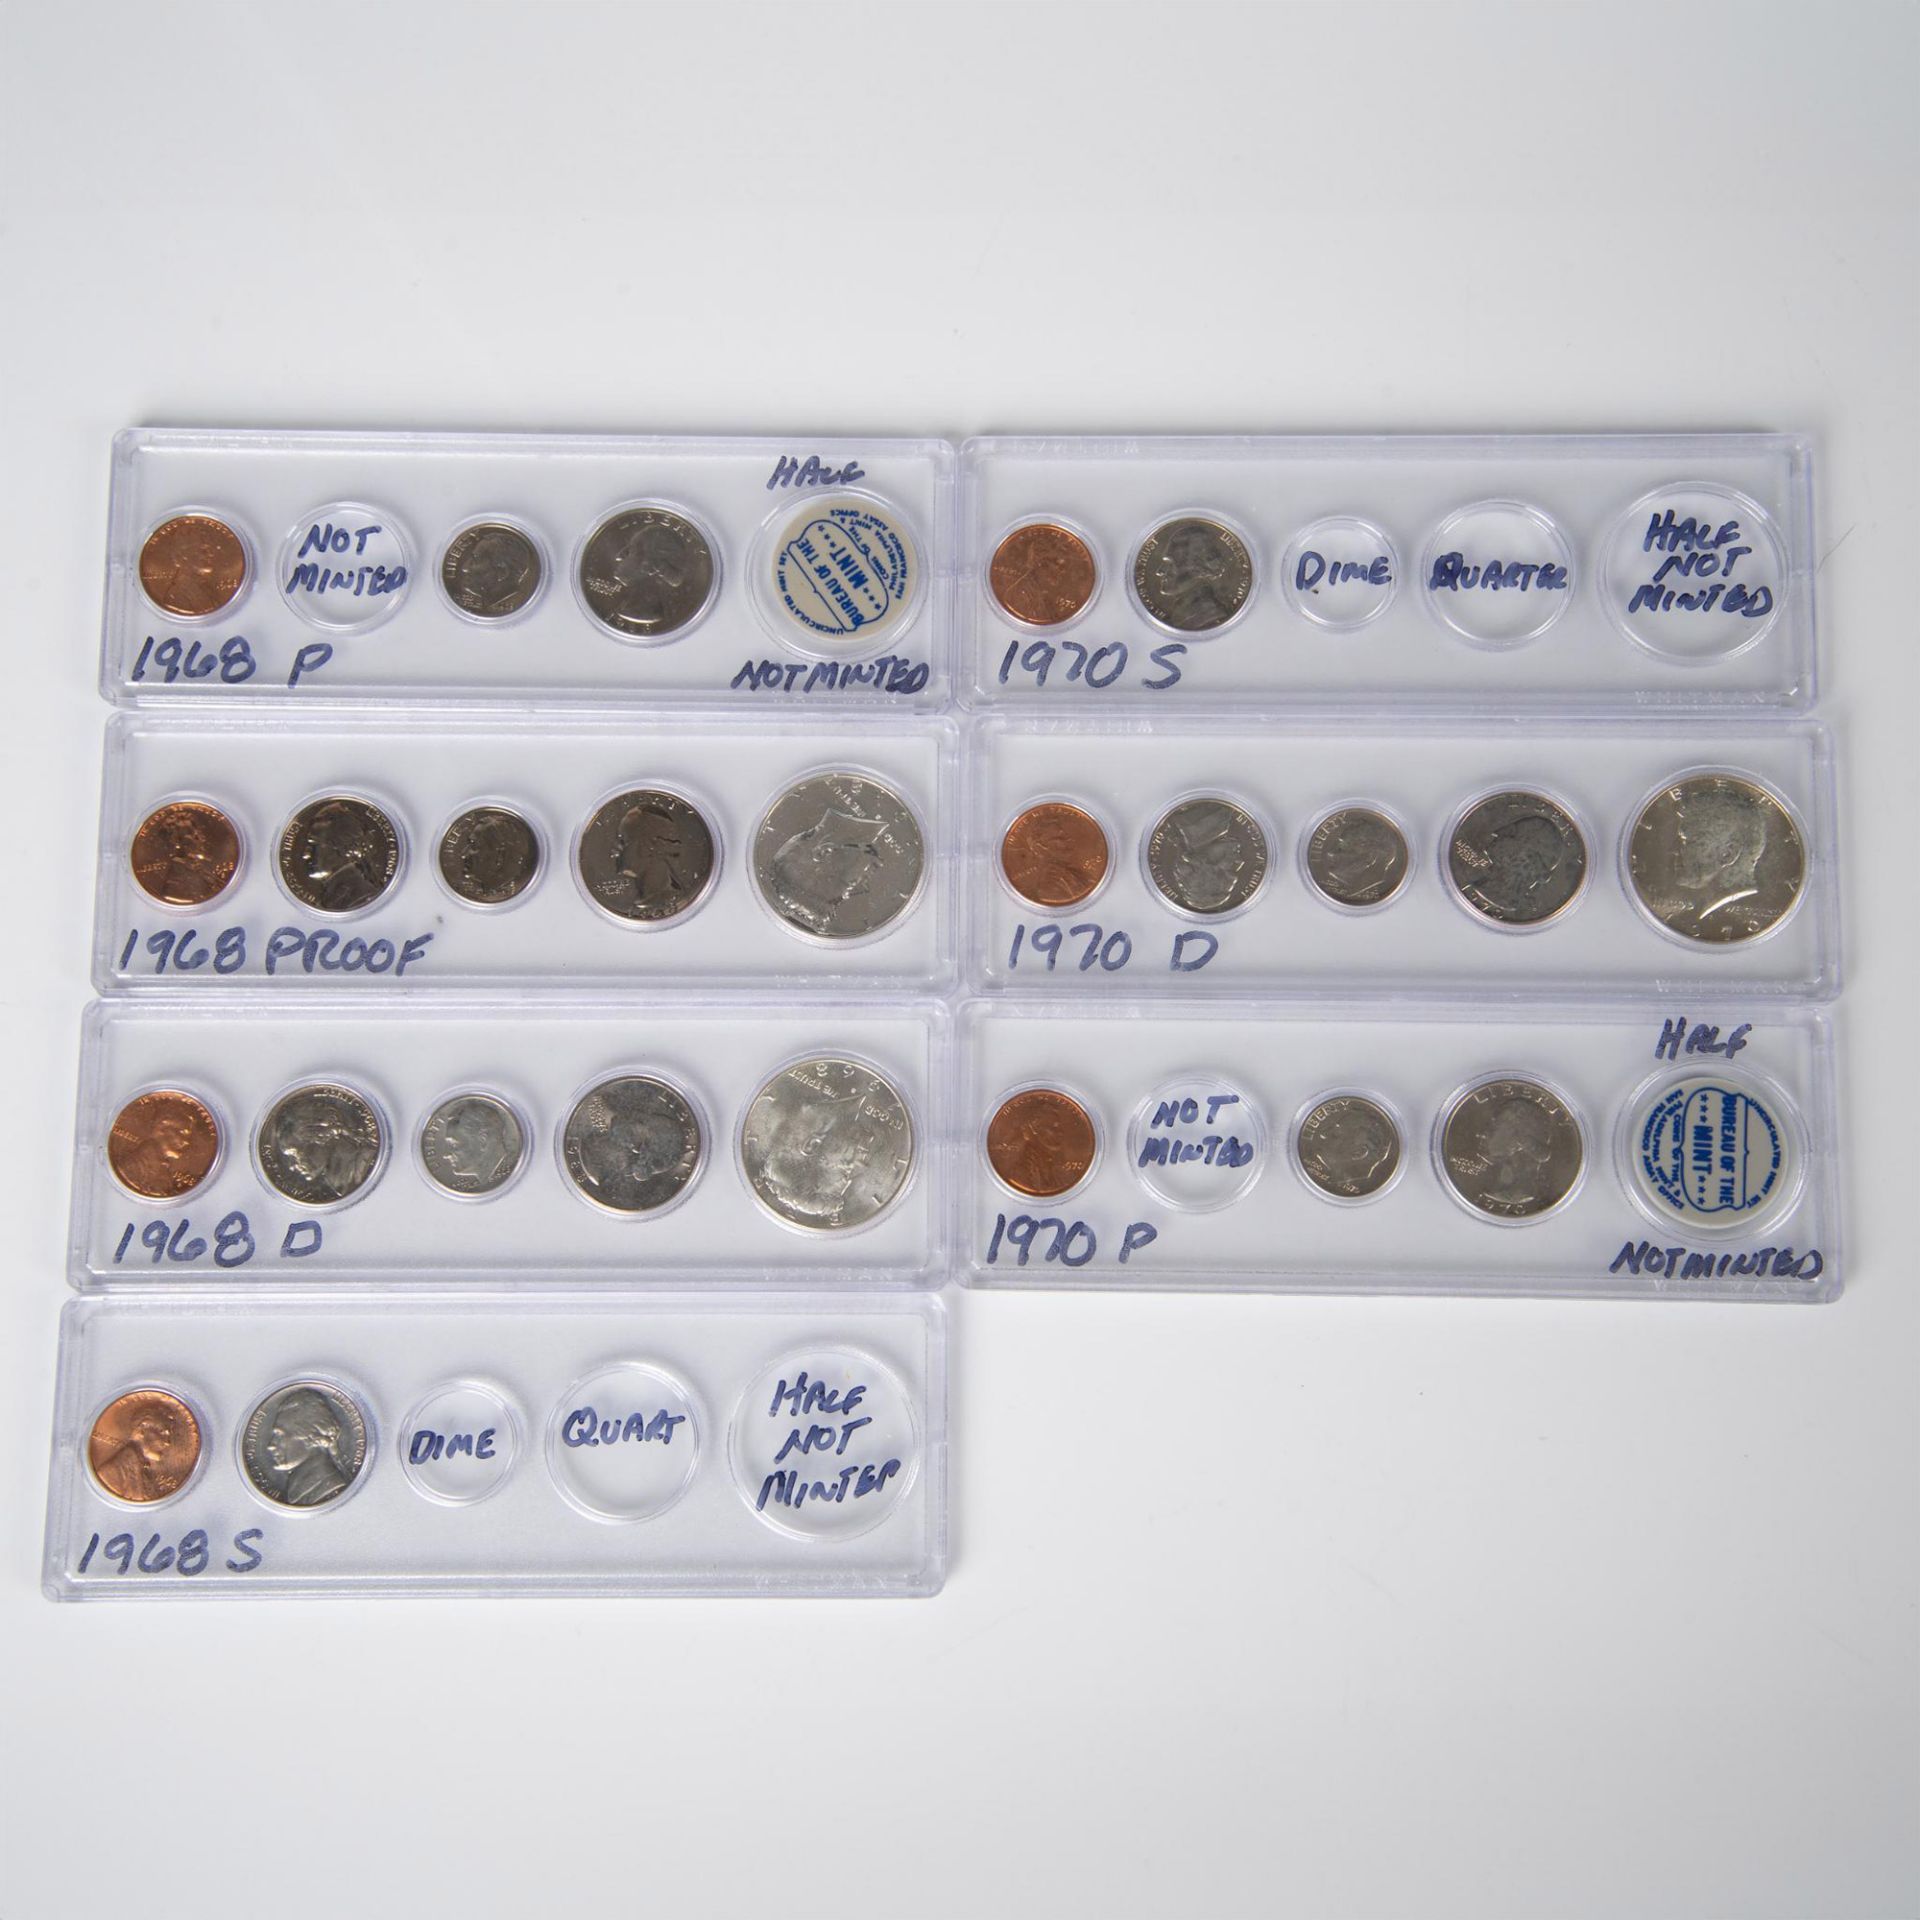 130PC COLLECTION OF US COINS SPANNING 1960-1970 - Image 6 of 6